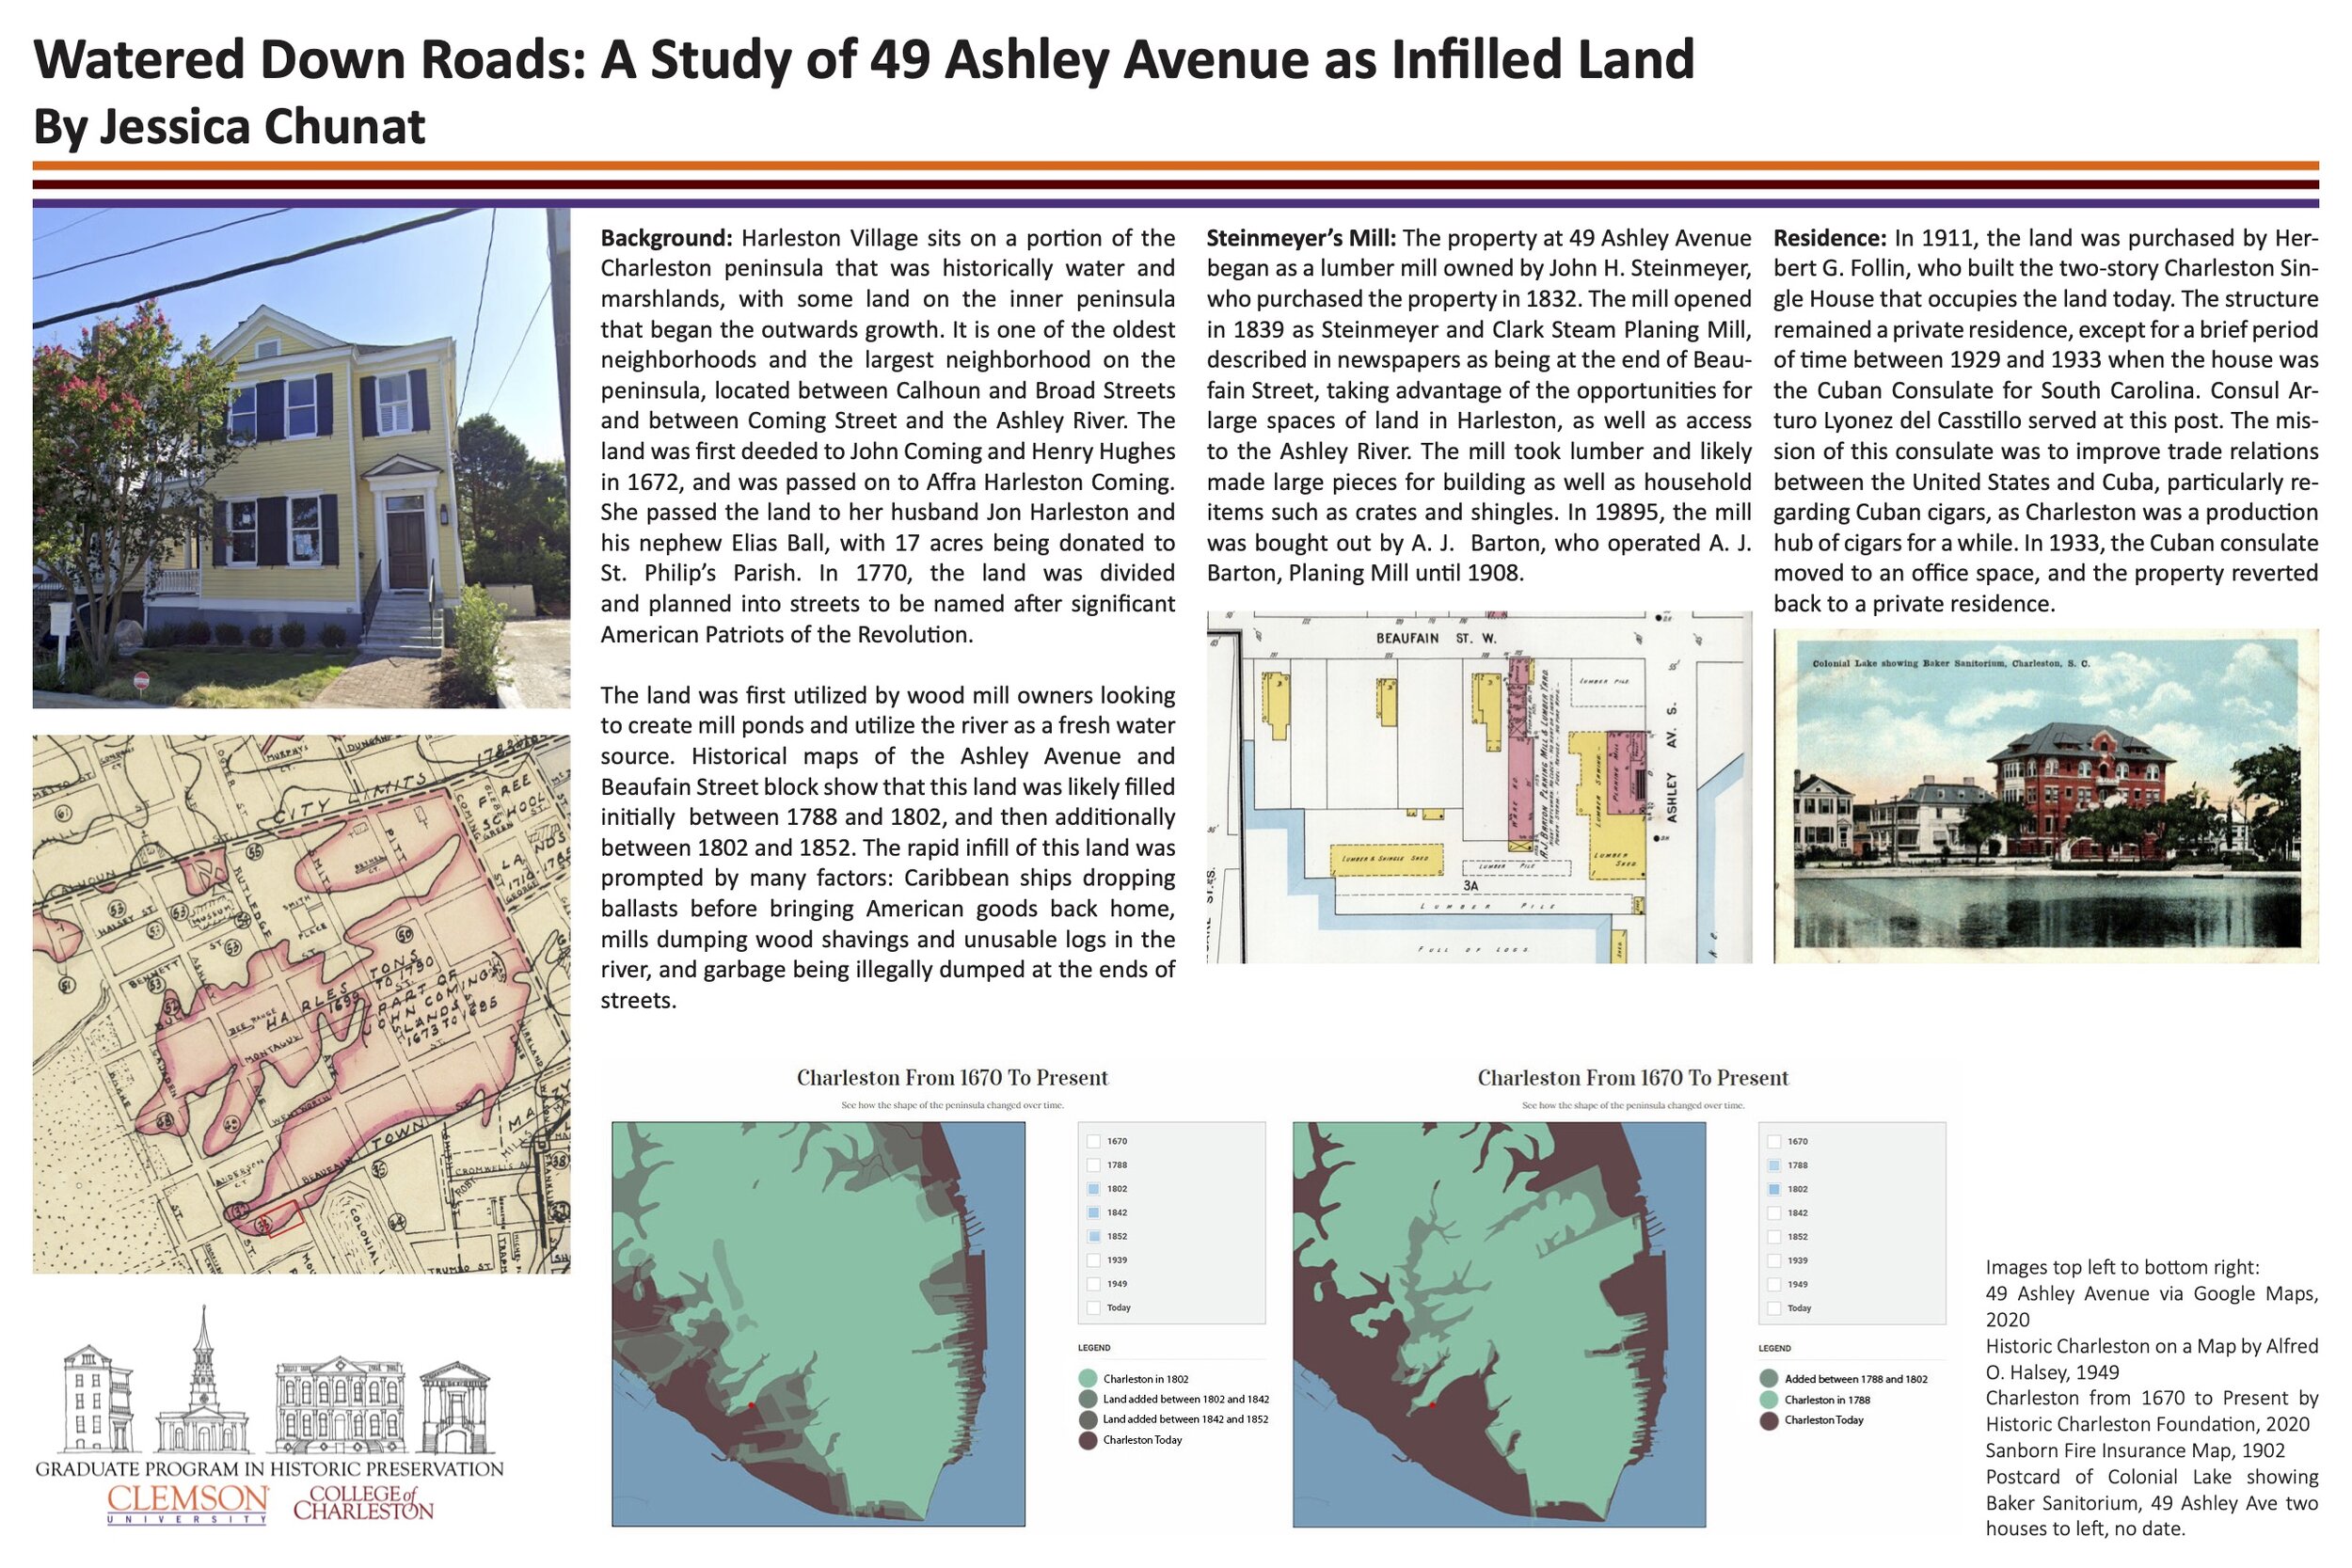 Watered Down Roads_ A Study of 49 Ashley Avenue as Infilled Land.jpg